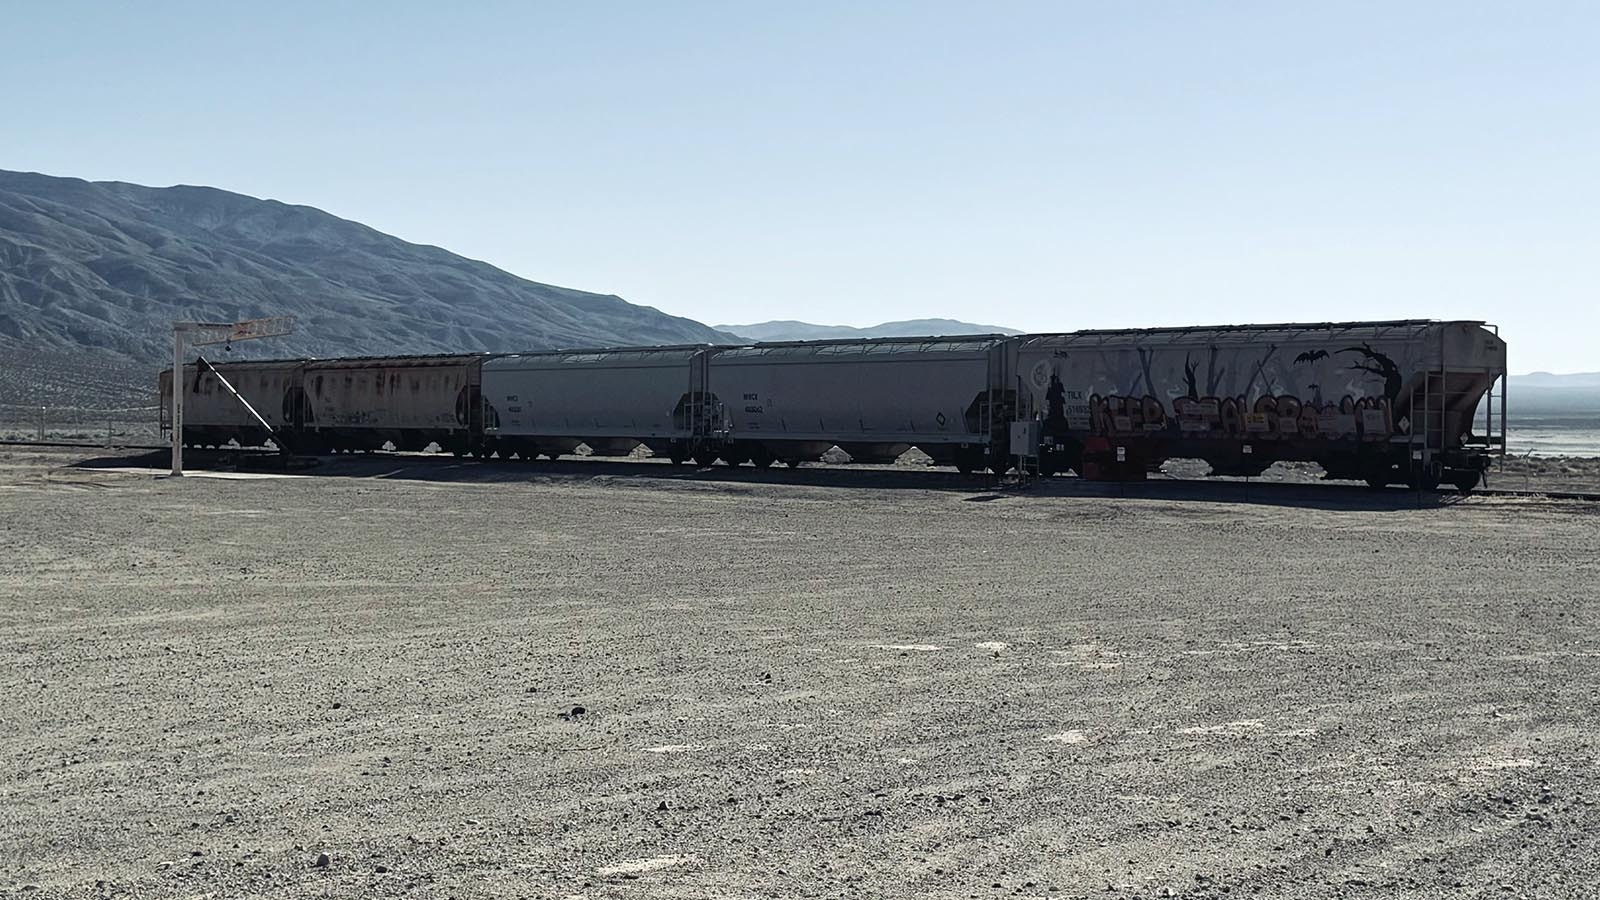 Hopper cars holding ammonium nitrate in Saltdale, California, in the Mojave Desert, where temperatures hit 100 on Monday.